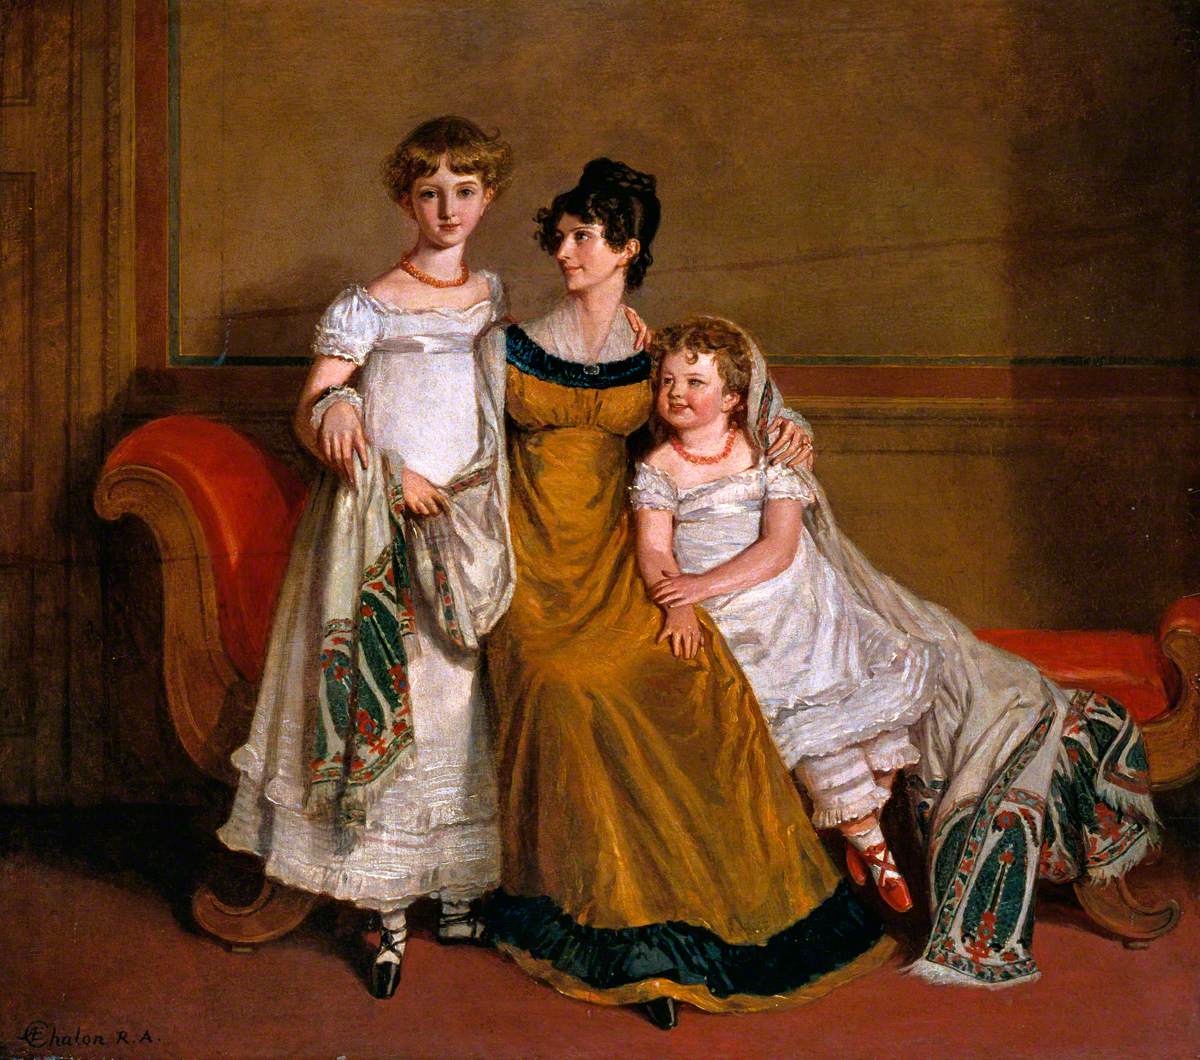 Portrait of a Woman with Two Children in a Domestic Interior